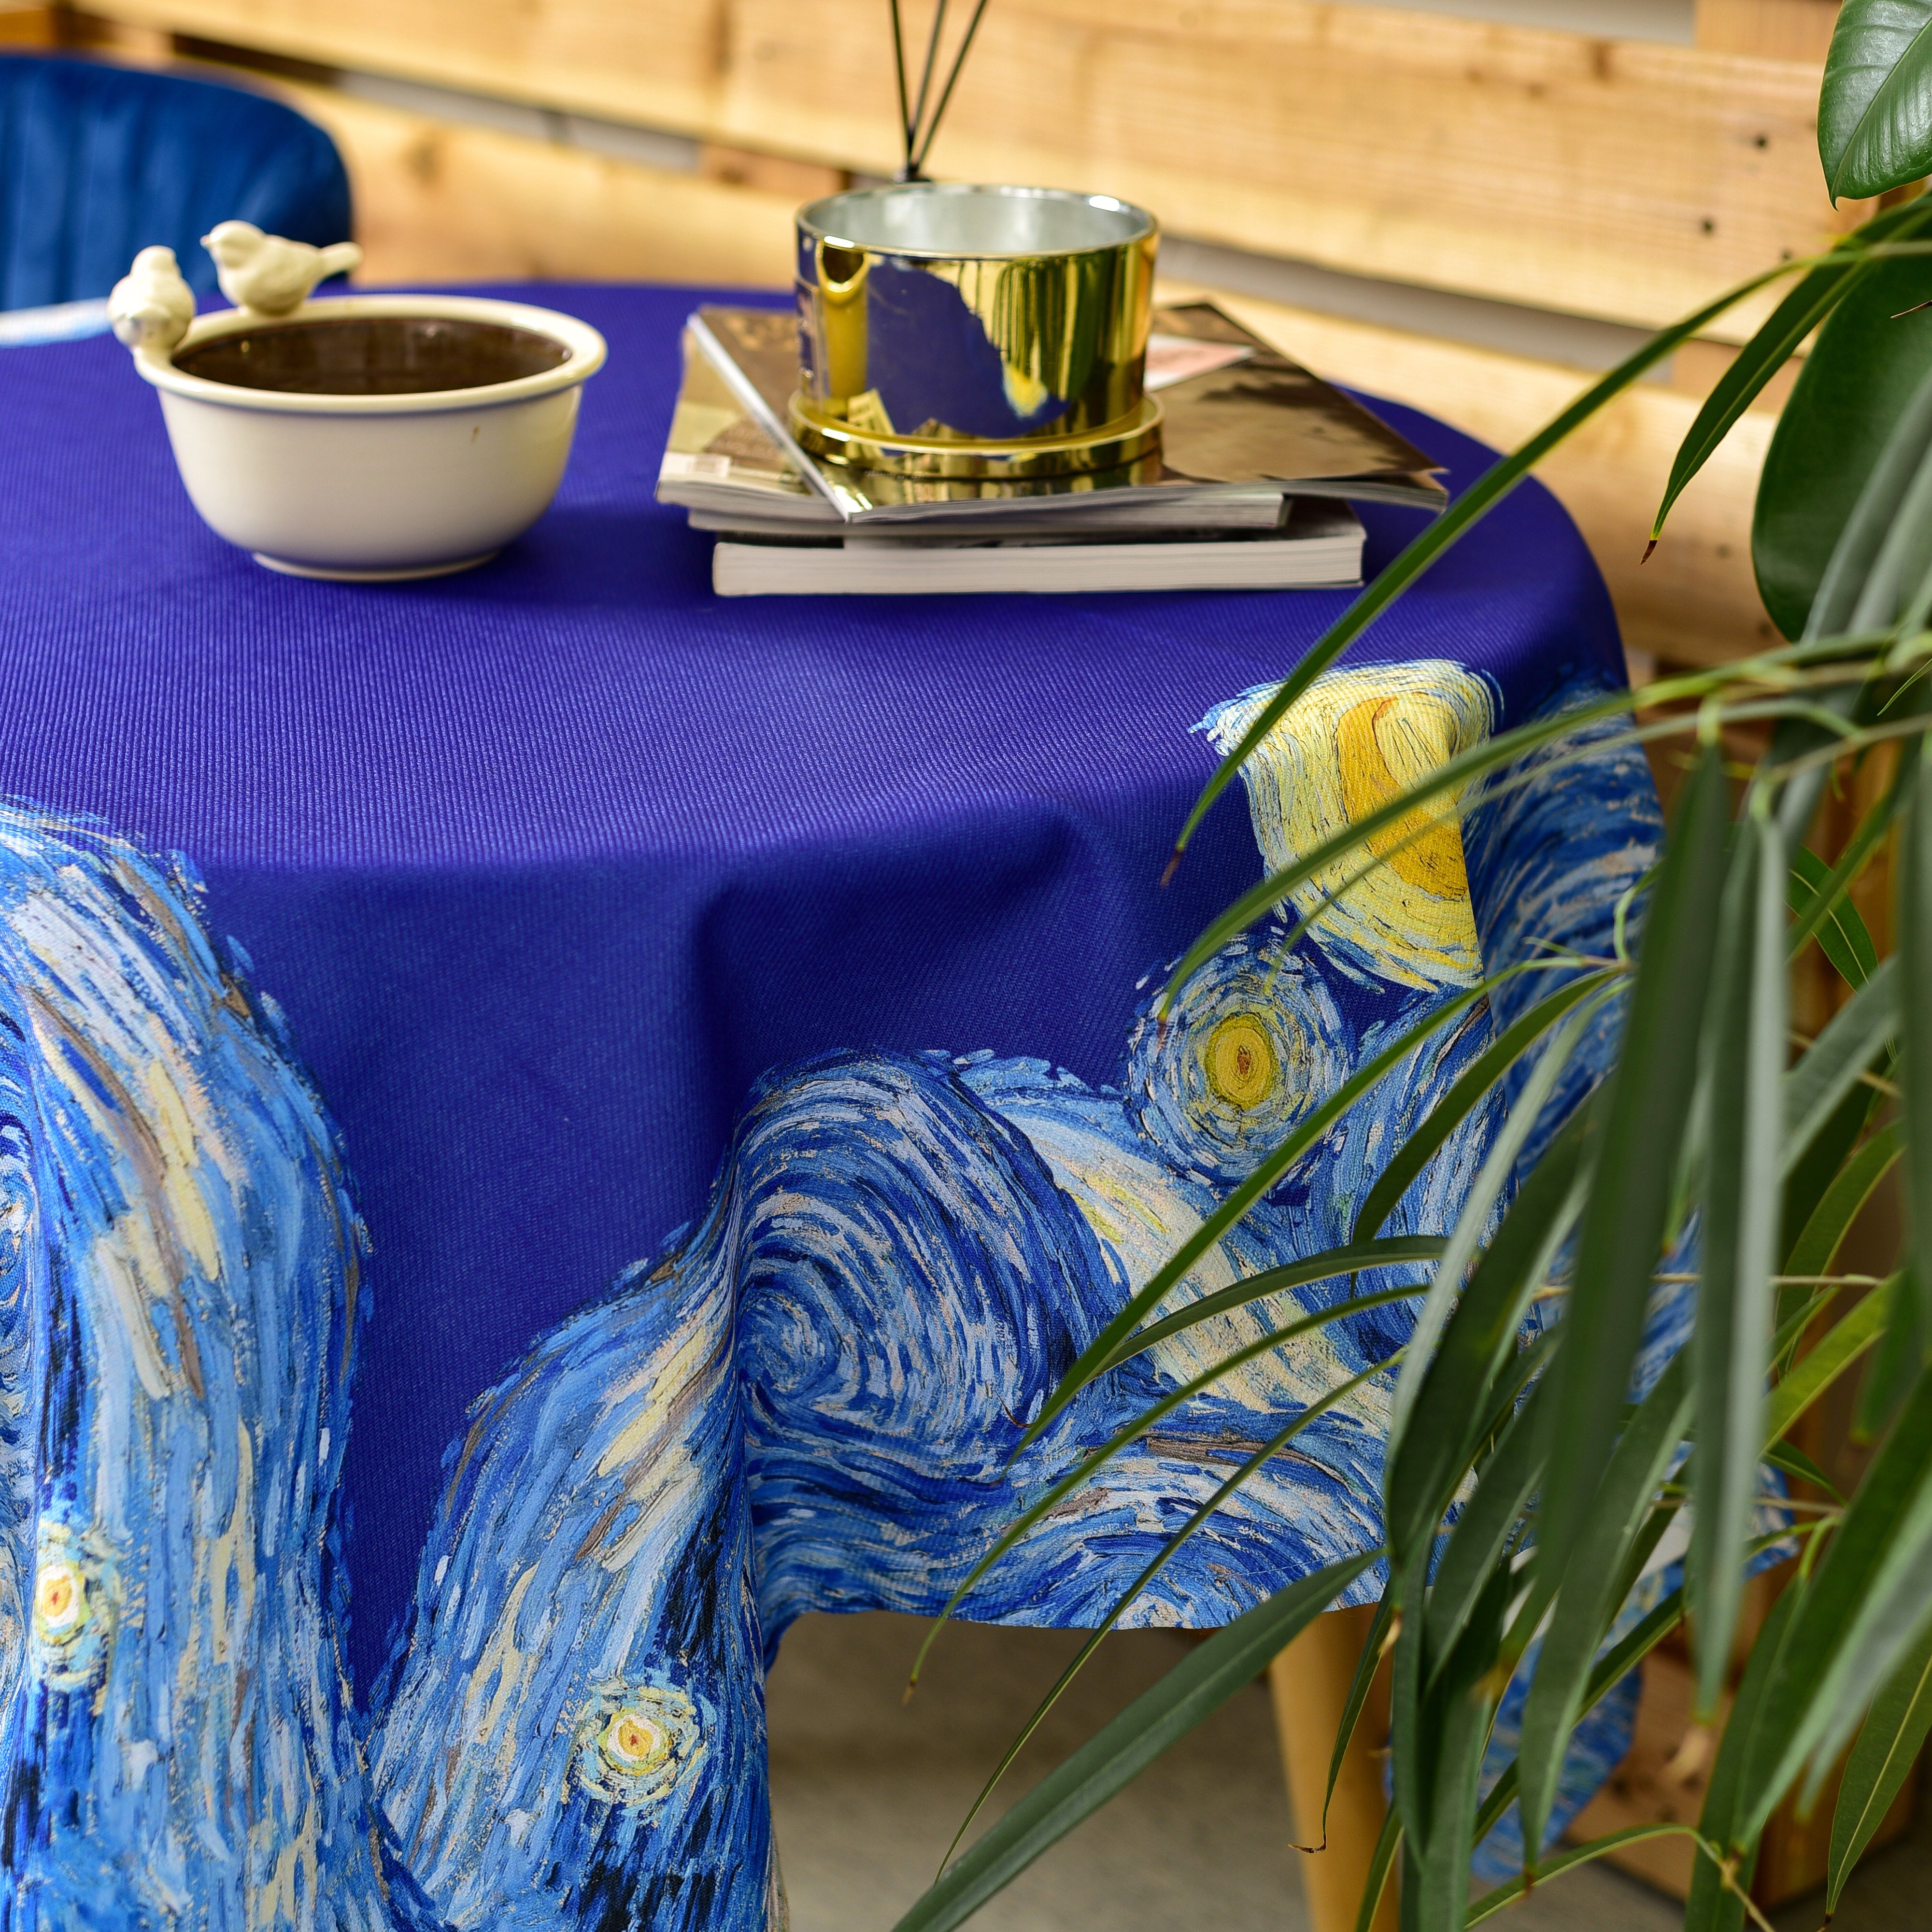 Recycled fabric tablecloth Vincent van Gogh "The Starry Night Pattern"